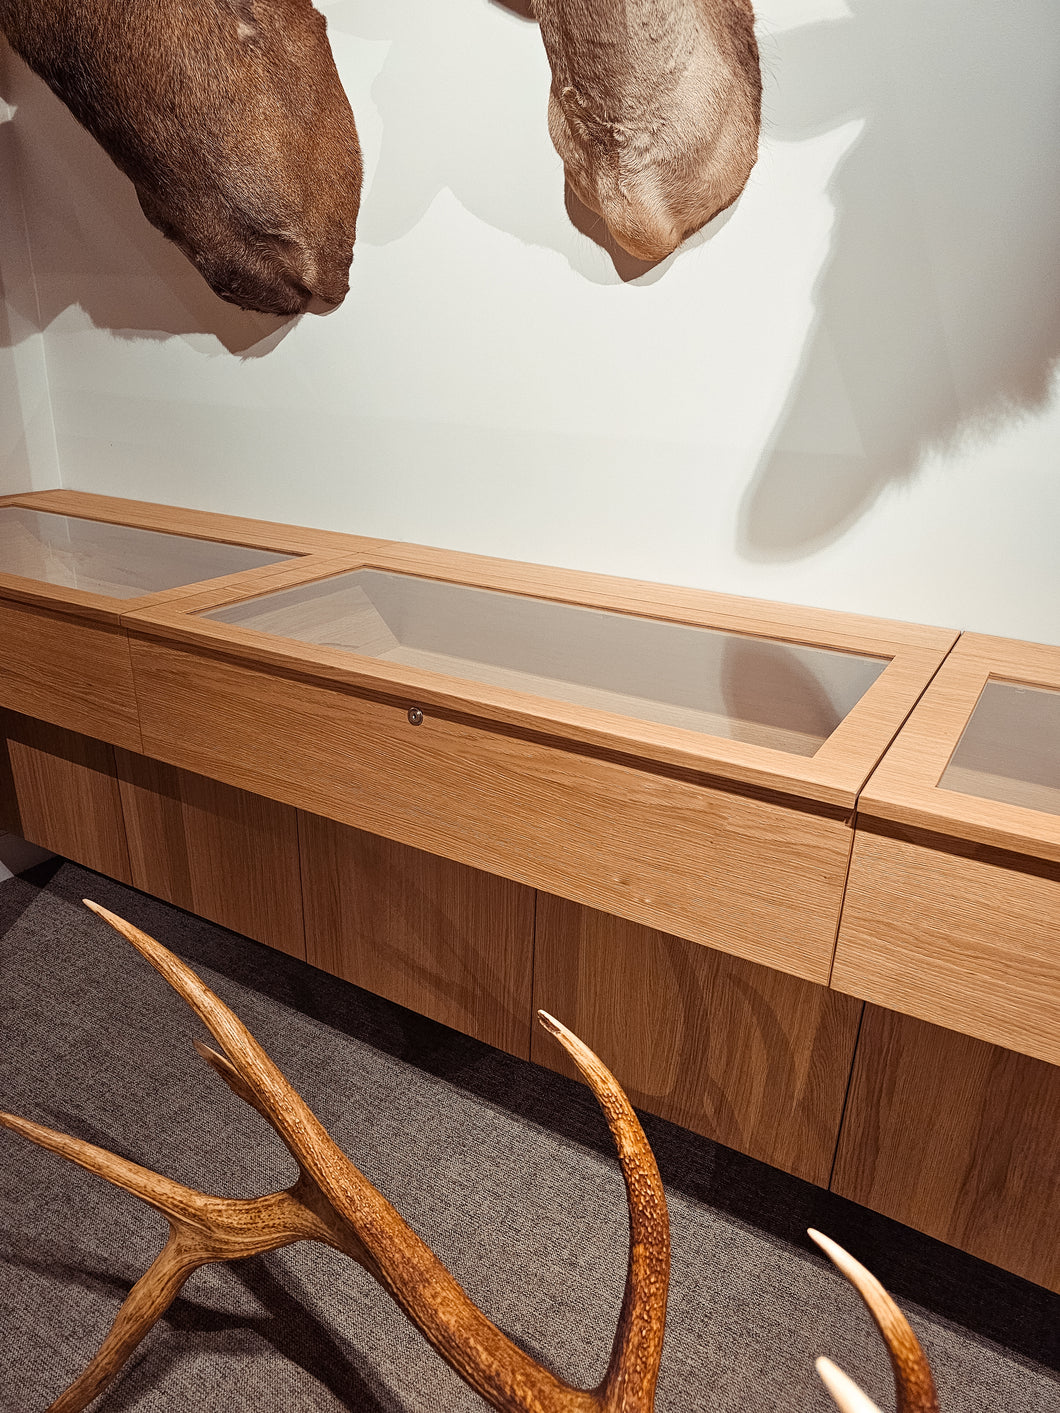 Fallow Deer Display Case | $5,000 Donation | NZ Hunting and Shooting Museum Display Cabinet